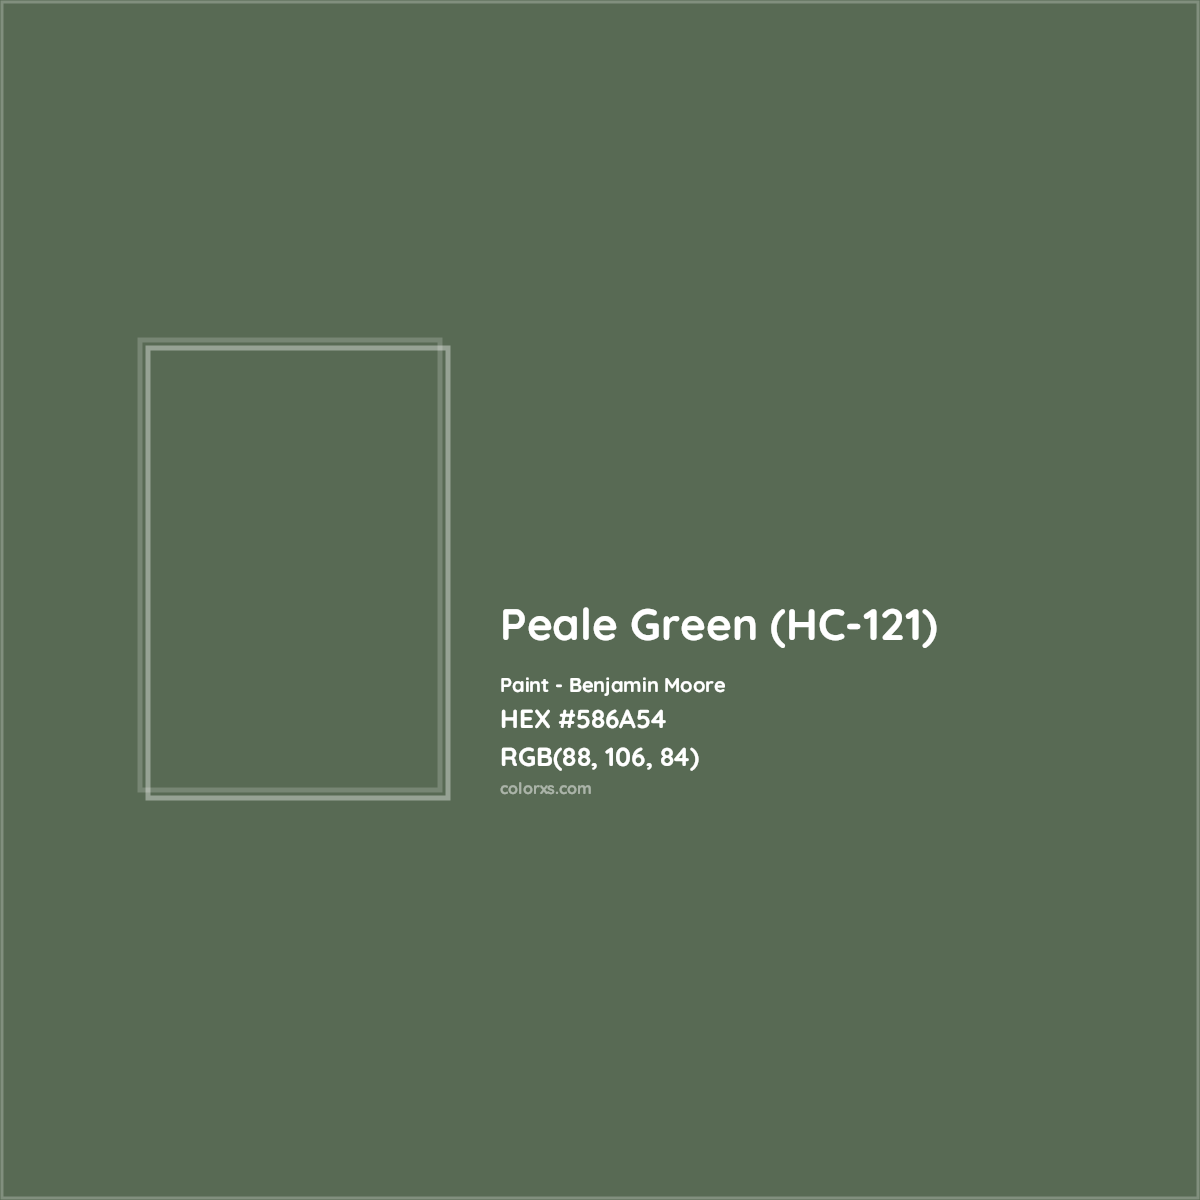 HEX #586A54 Peale Green (HC-121) Paint Benjamin Moore - Color Code